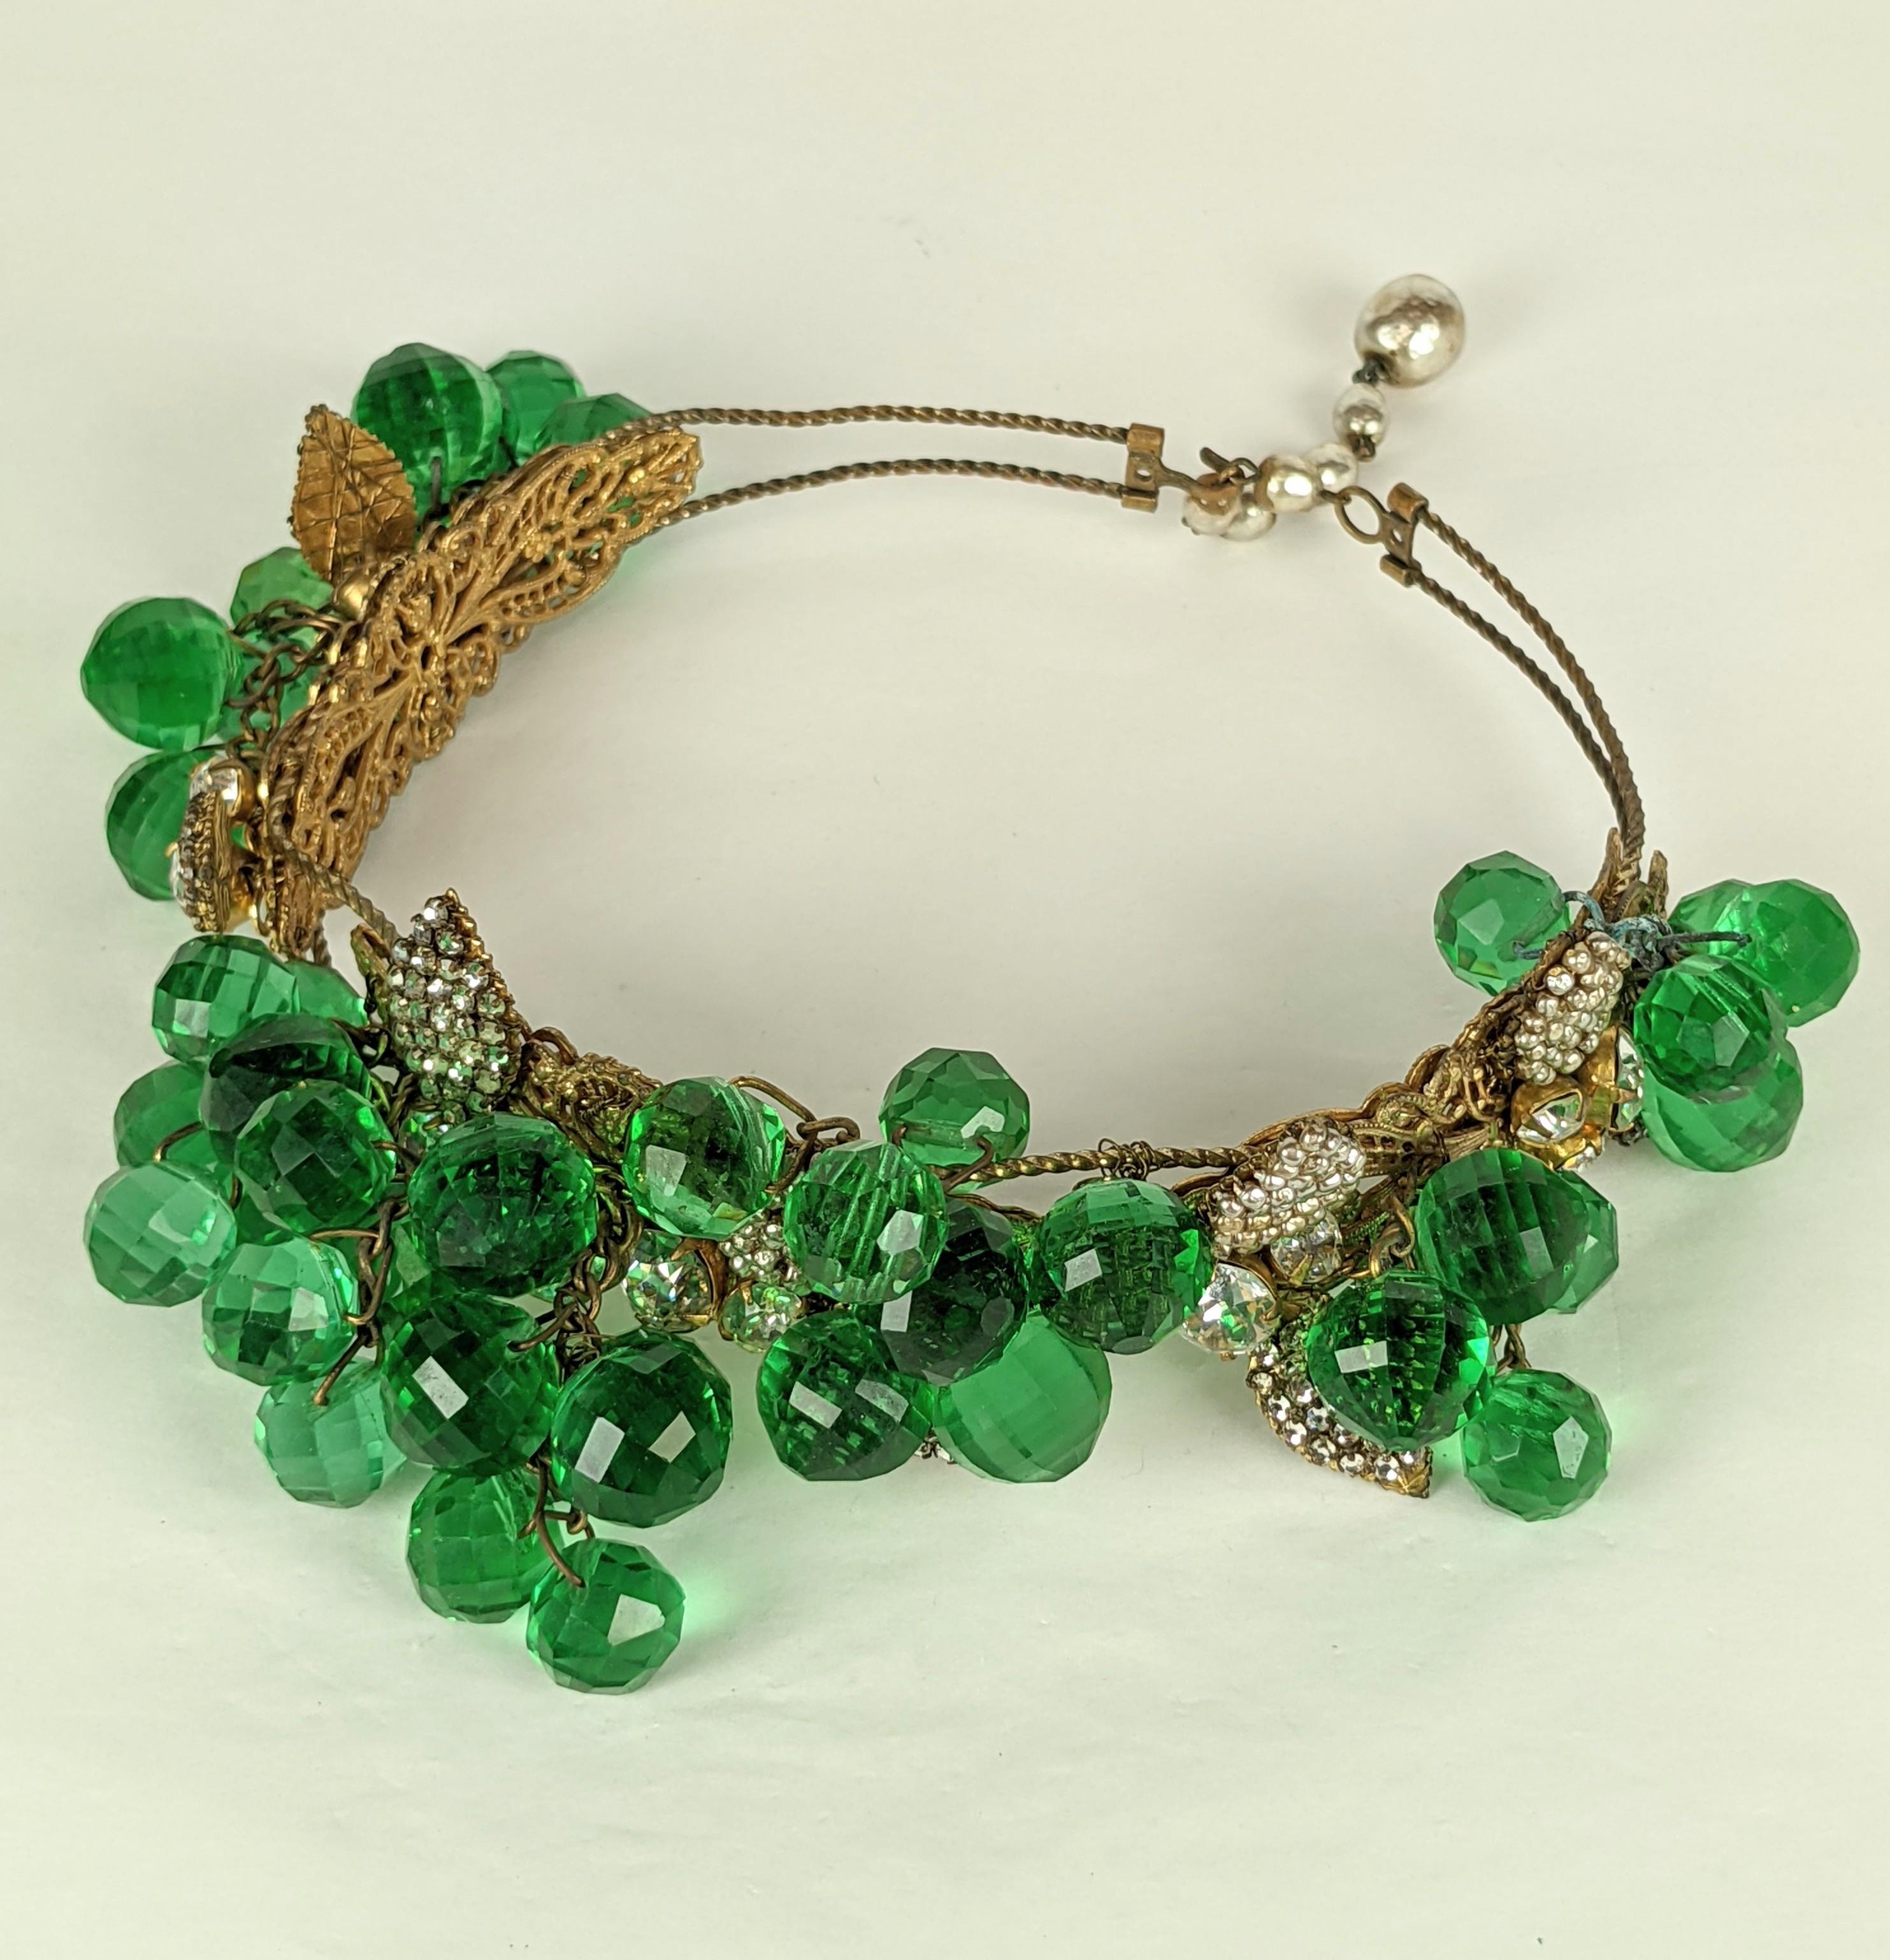 Art Deco Important Miriam Haskell Massive Pale Emerald Bead and Crystal Collar/Tiara For Sale